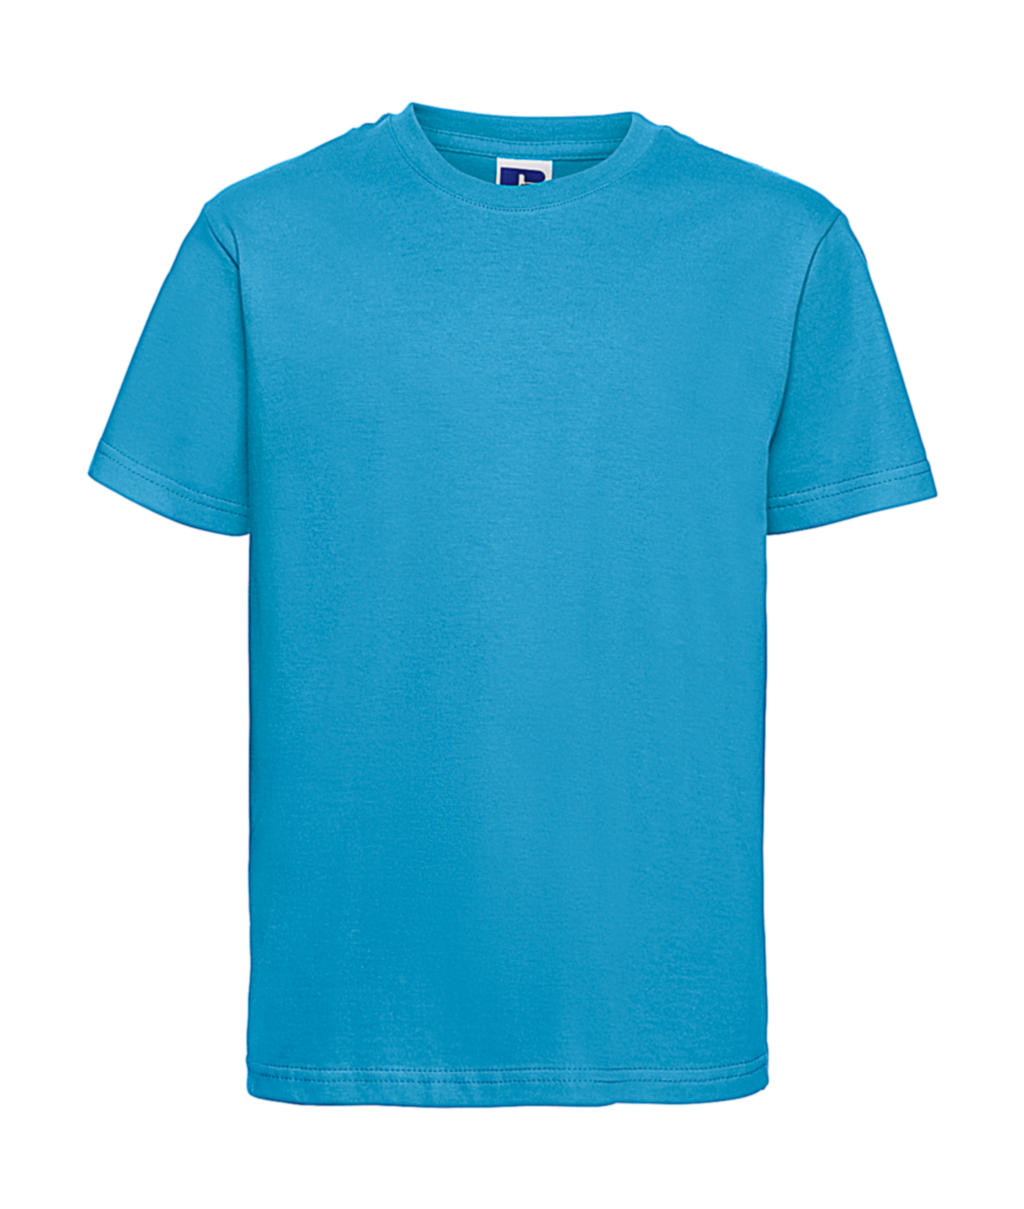  Kids Slim T-Shirt in Farbe Turquoise